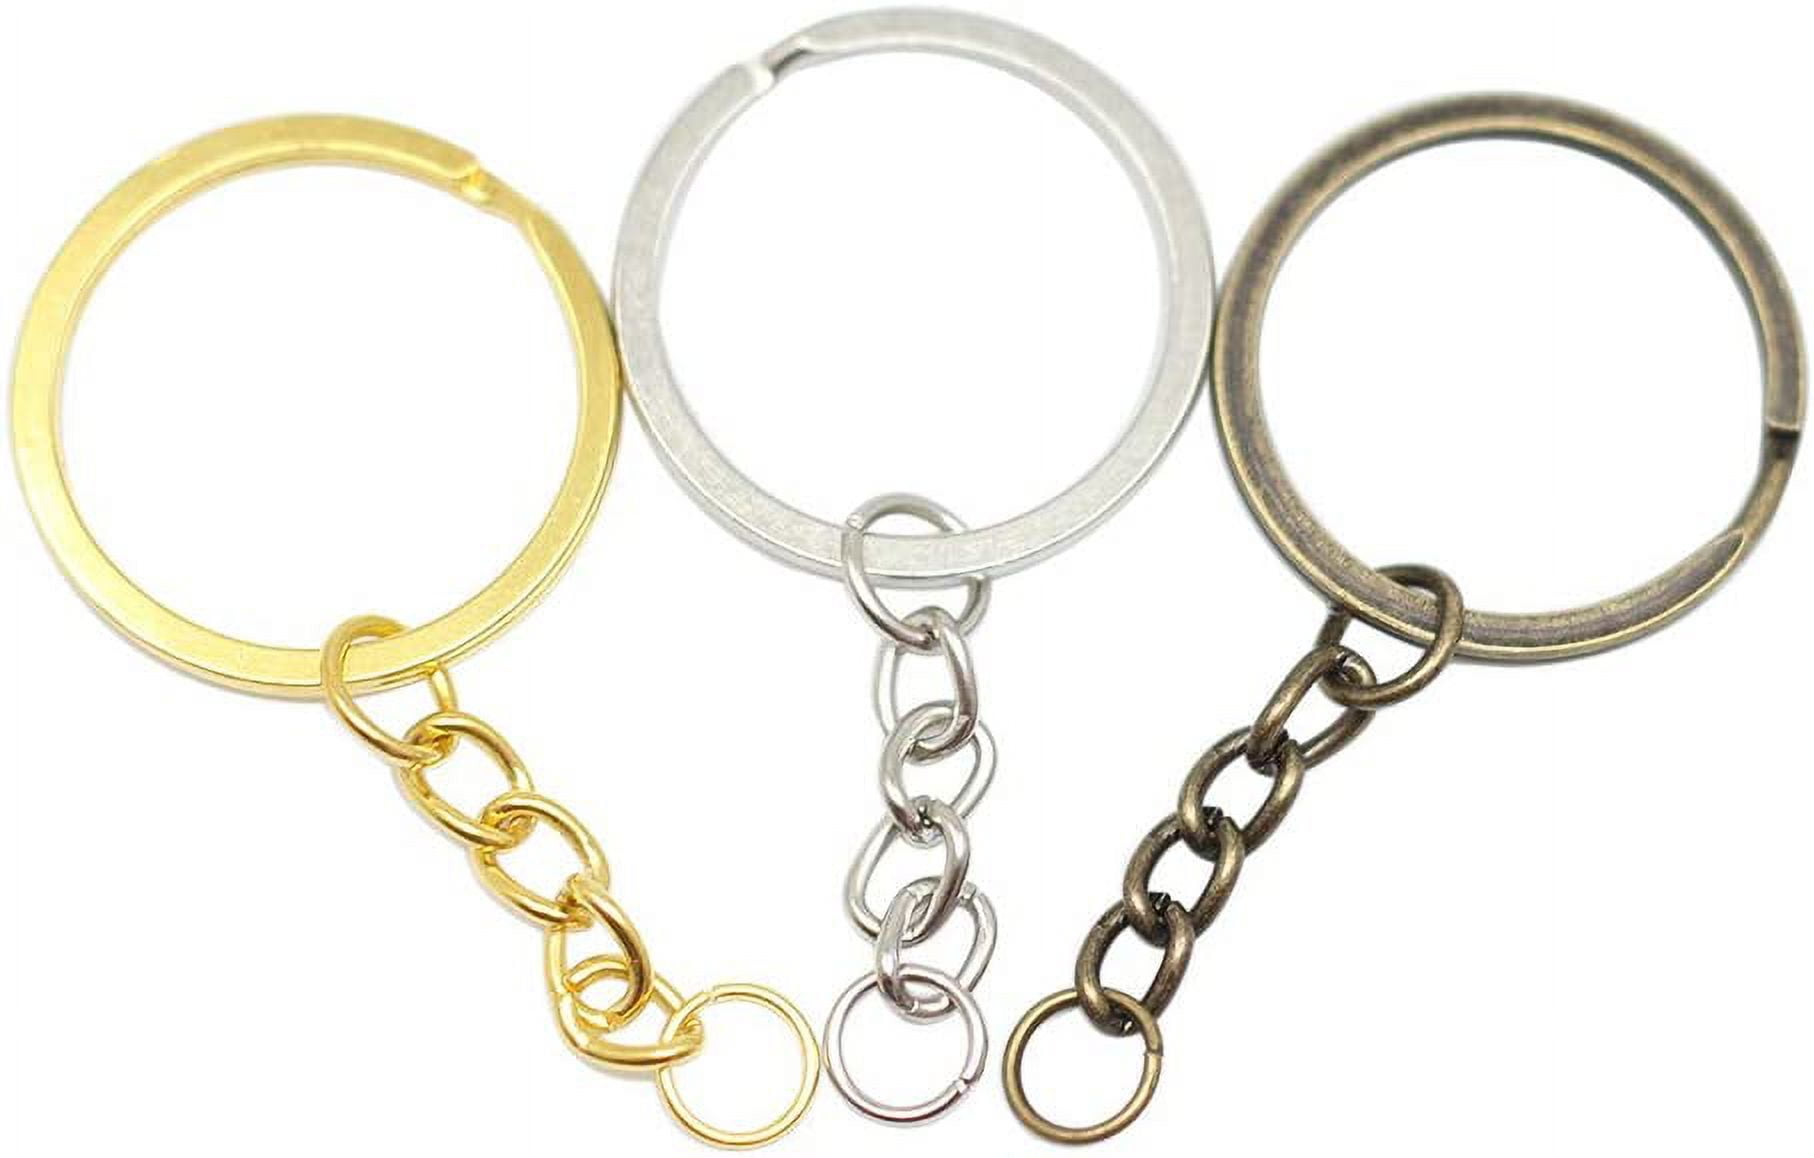 10 pcs/lot Split Key Ring with Chain and Jump Rings 60mm Long Round Split  Keychain Keyrings Jewelry Making Bulk 3 Sizes(Antique Bronze,  30mm(1.18inch)) 